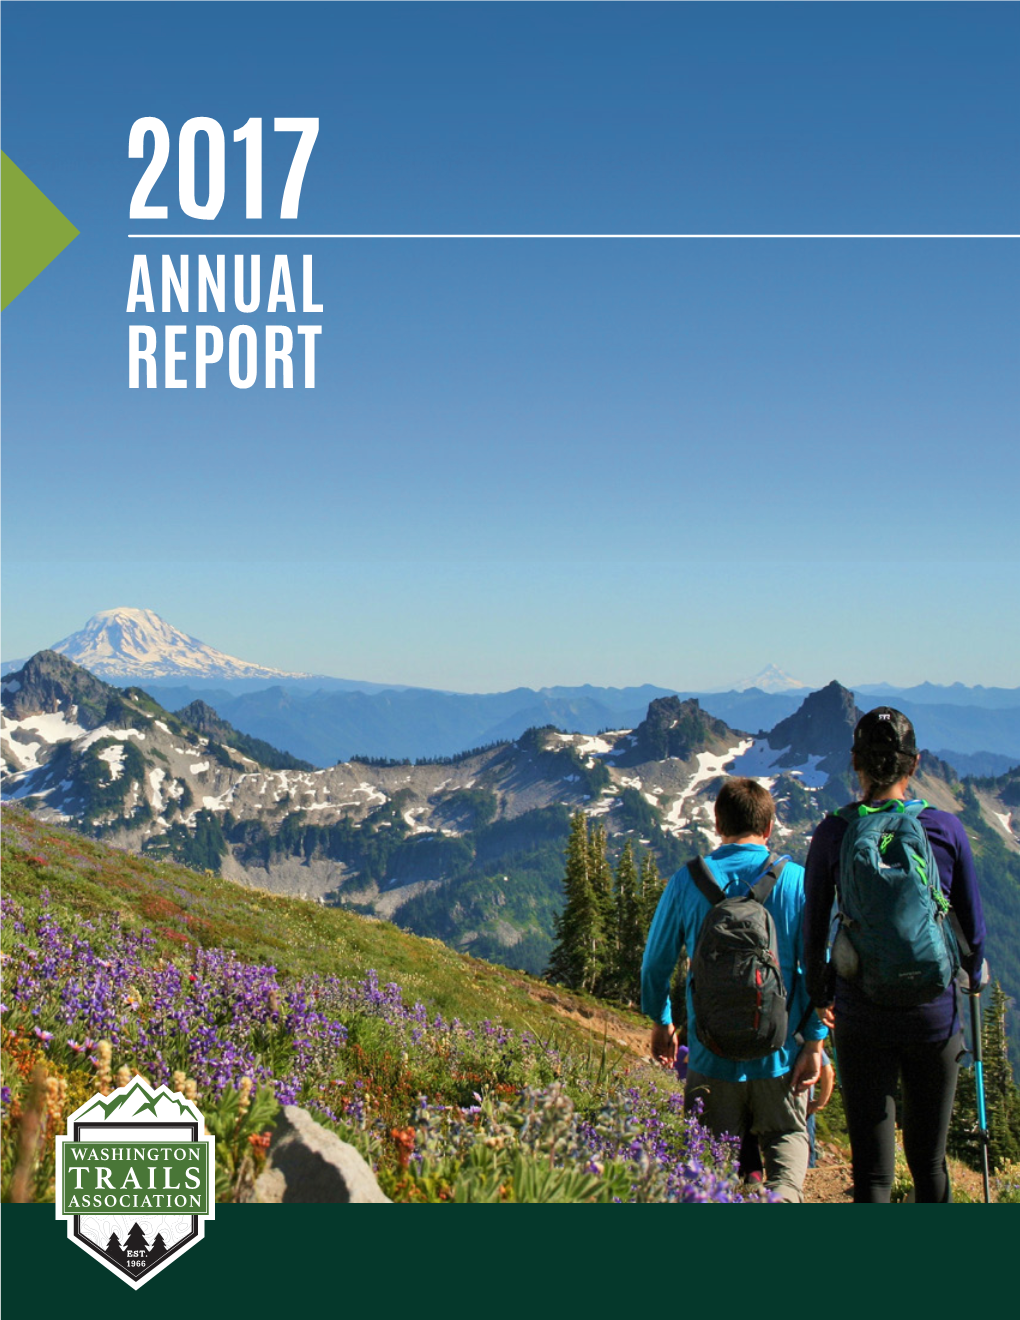 Report at Washington Trails Association, 2017 Was a Year of Helping Our Community Grow and Deepening Our Impact